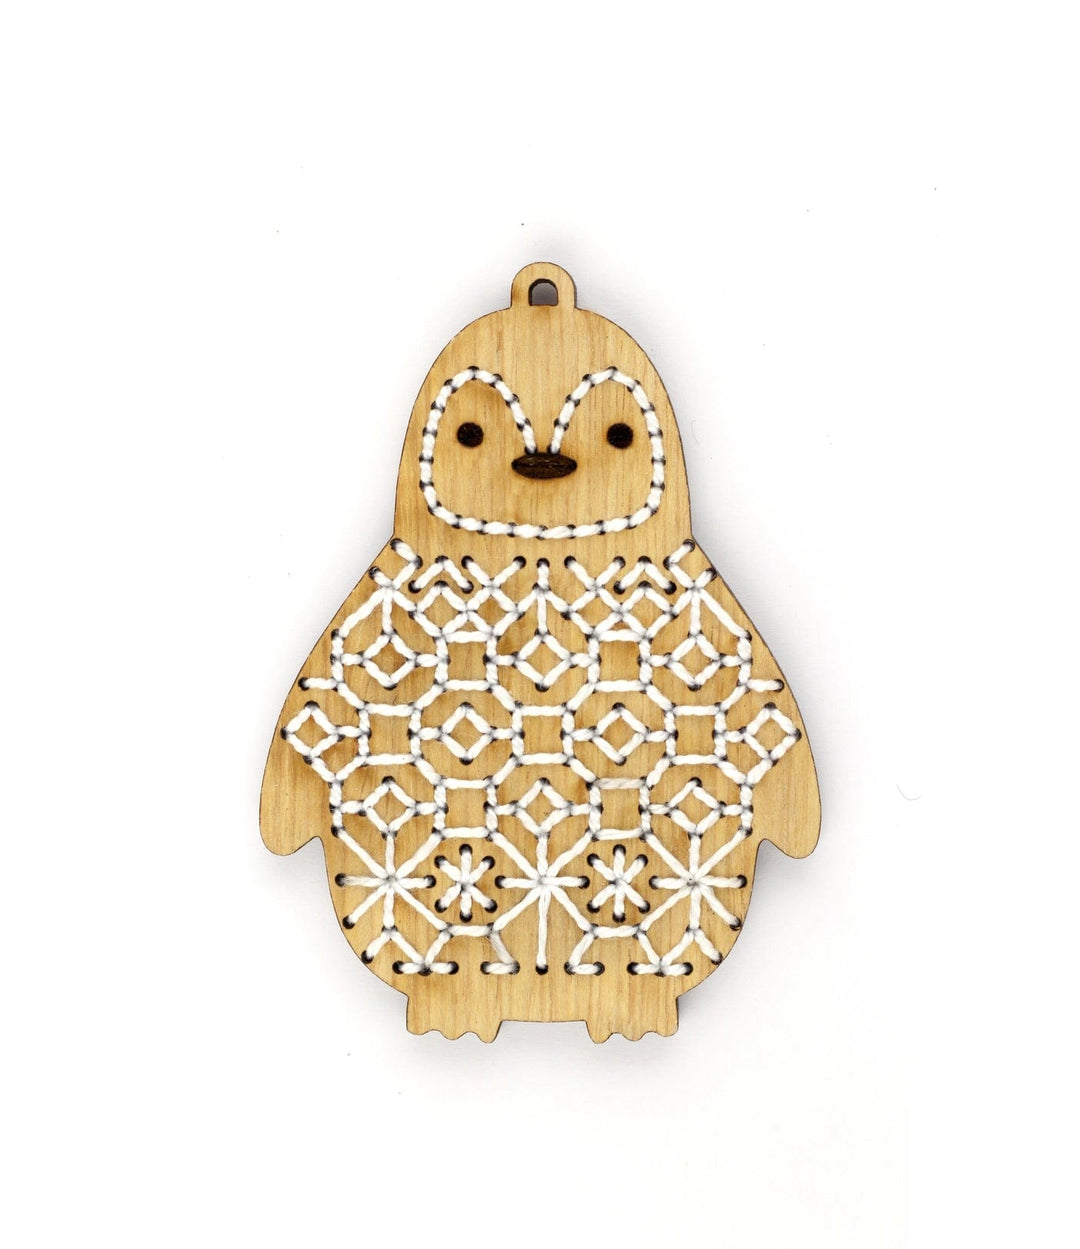 Wooden Penguin Stitched Ornament Kit from Kiriki